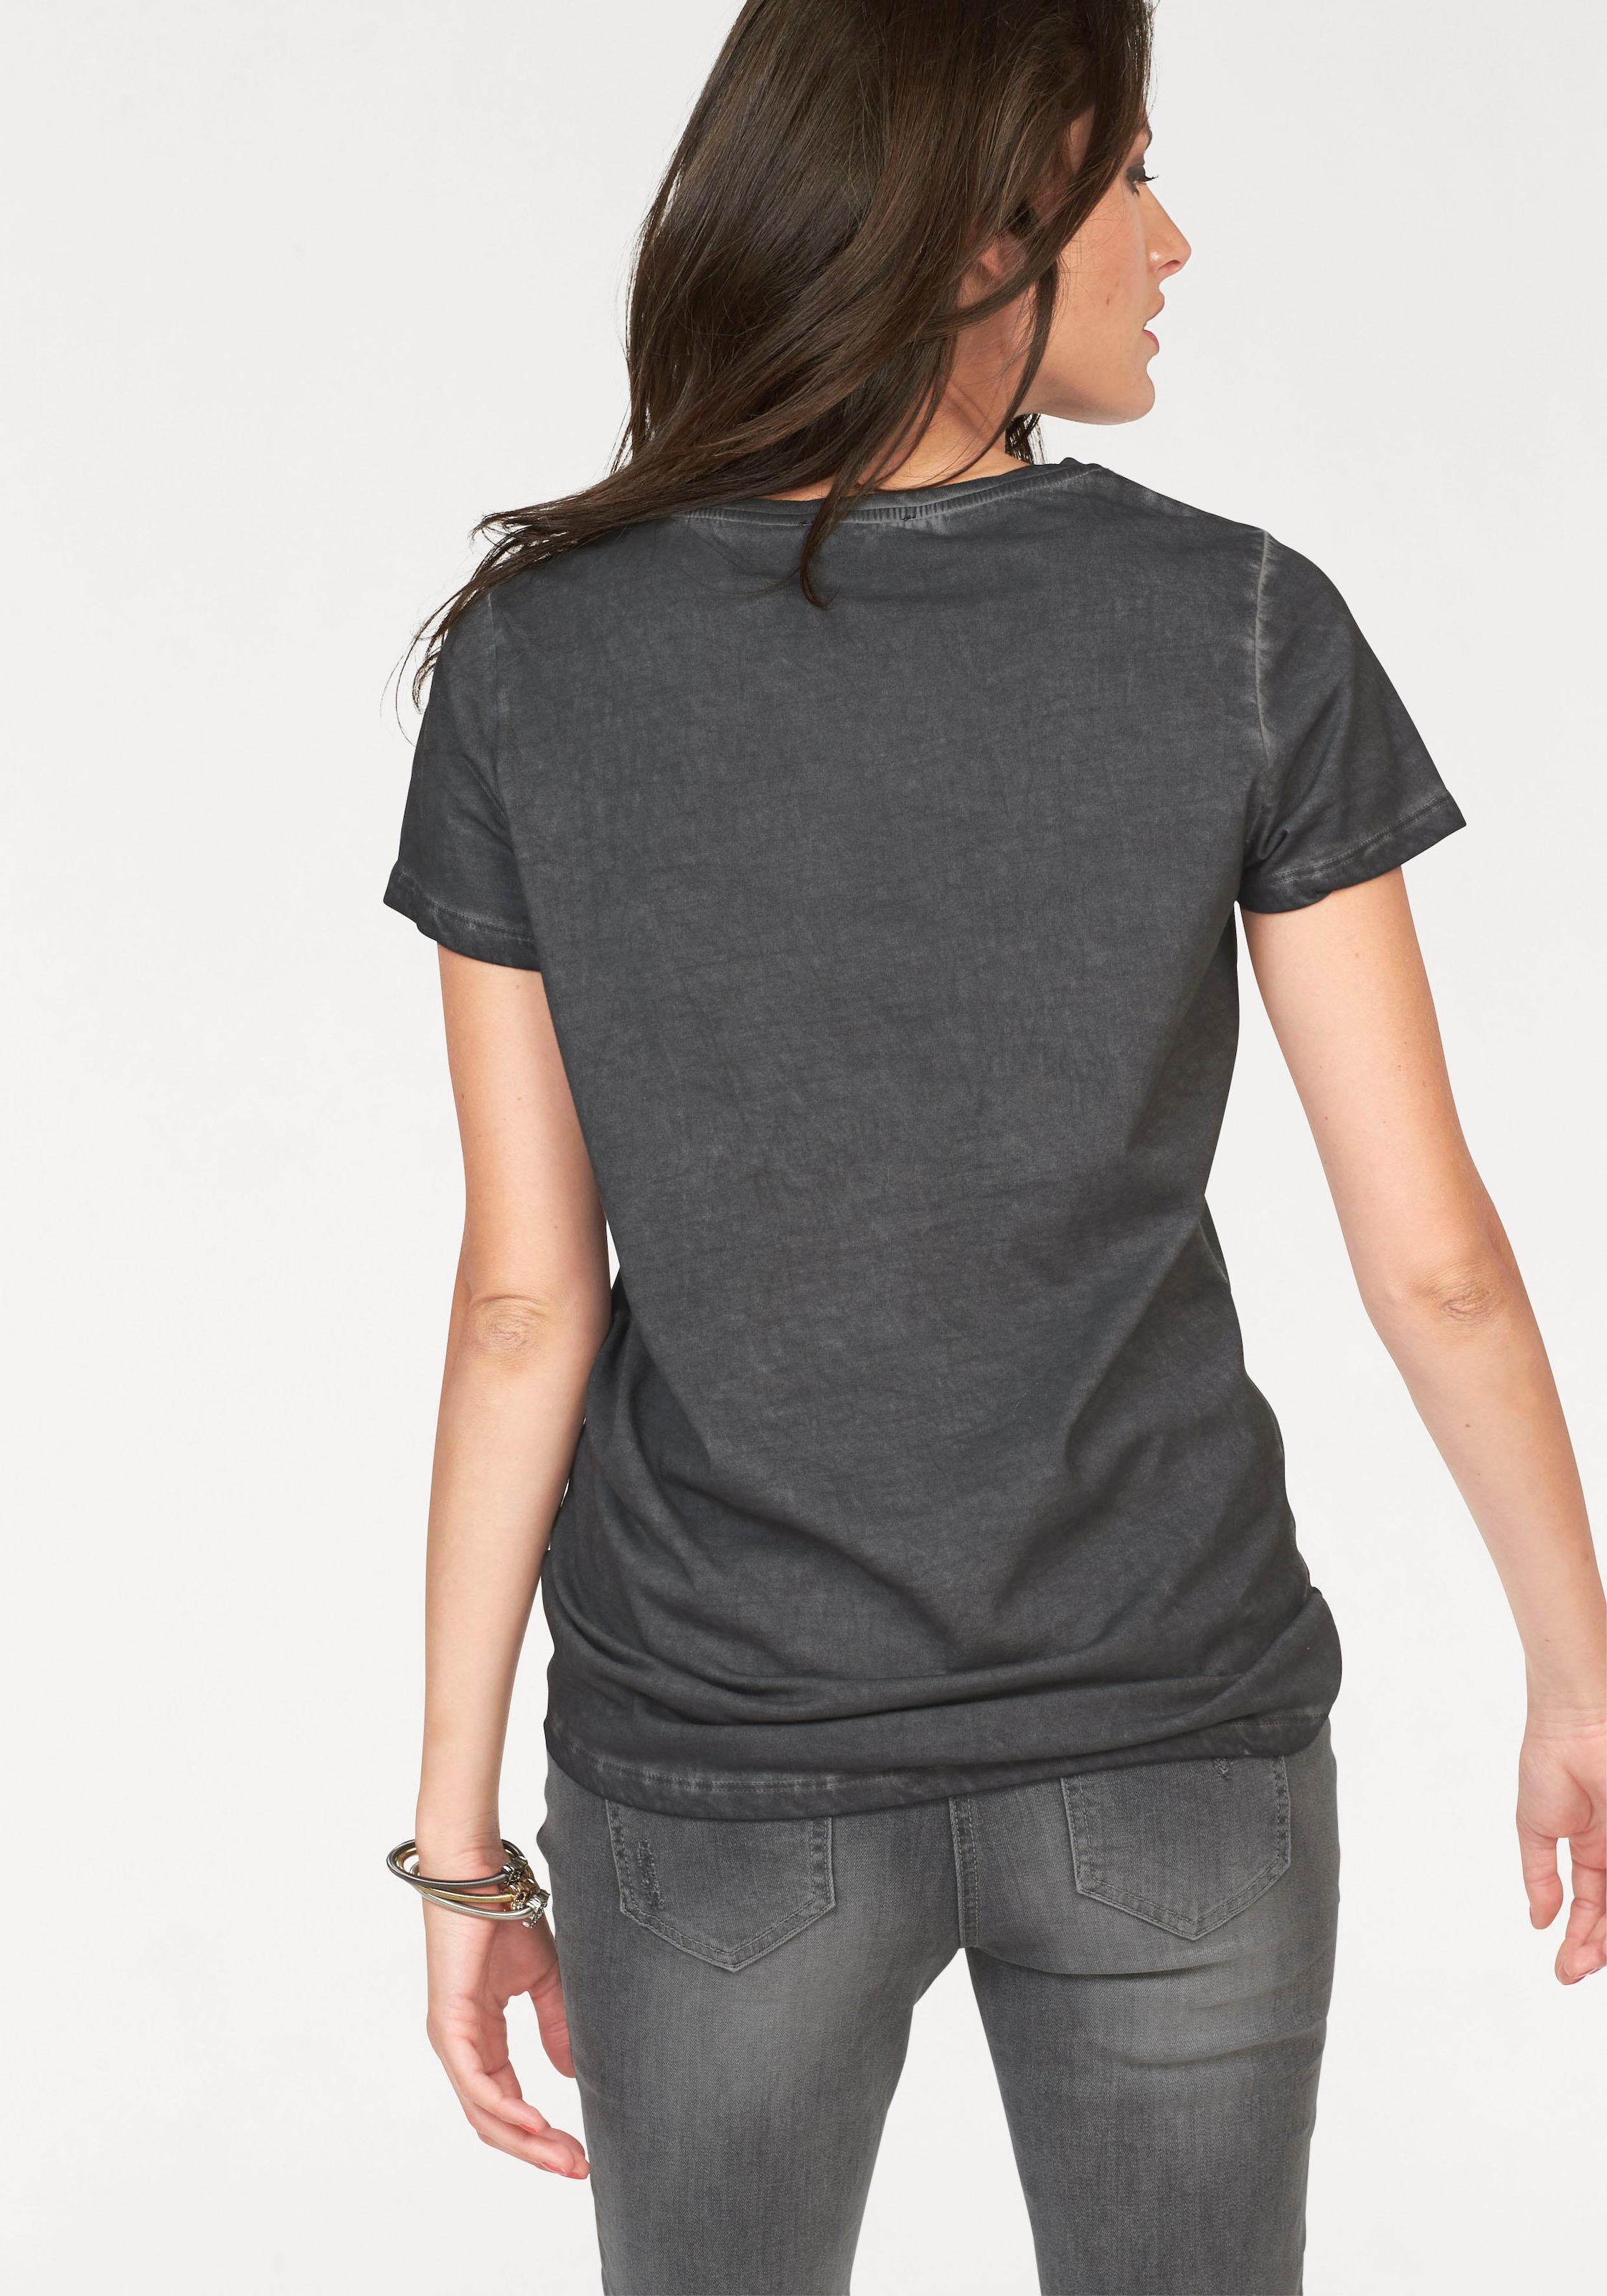 mit CASUAL Oil bei Aniston T-Shirt, dyed-Waschung ♕